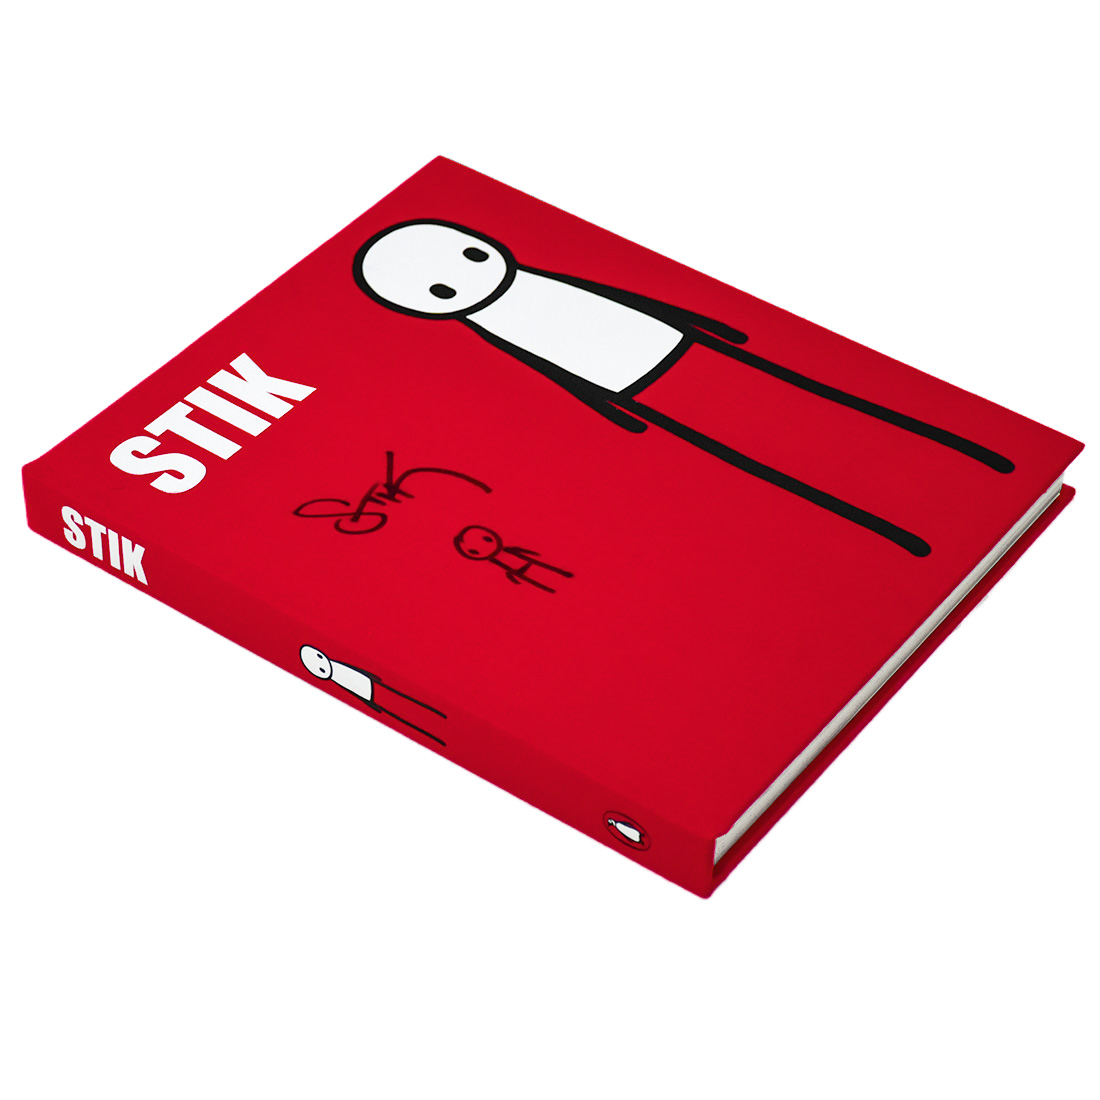 side view of artist stik book signed with hand drawn figure on cover